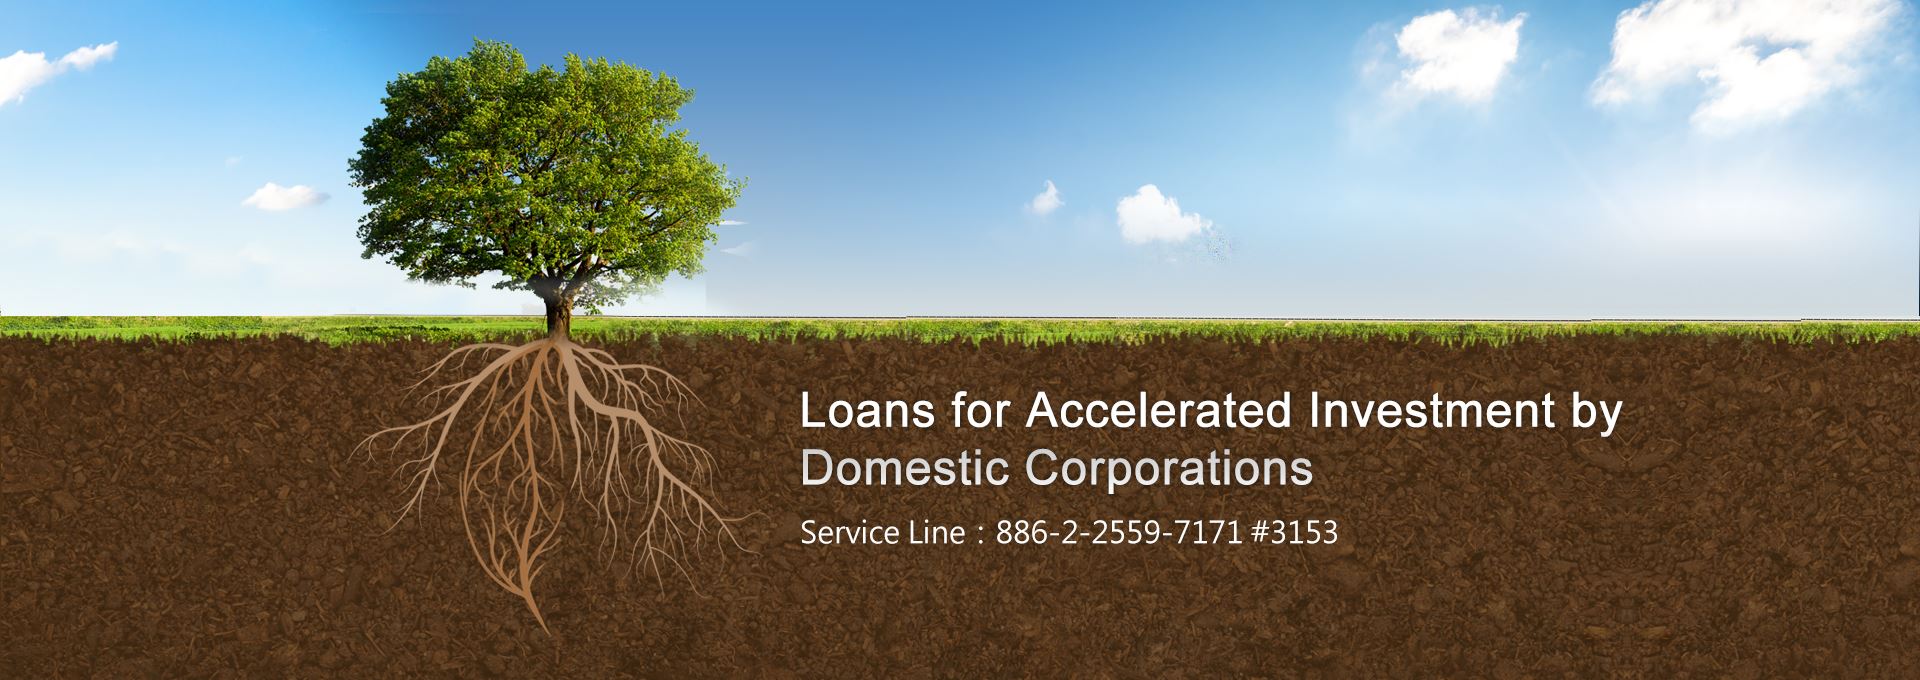 Loans for Accelerated Investment by Domestic Corporations